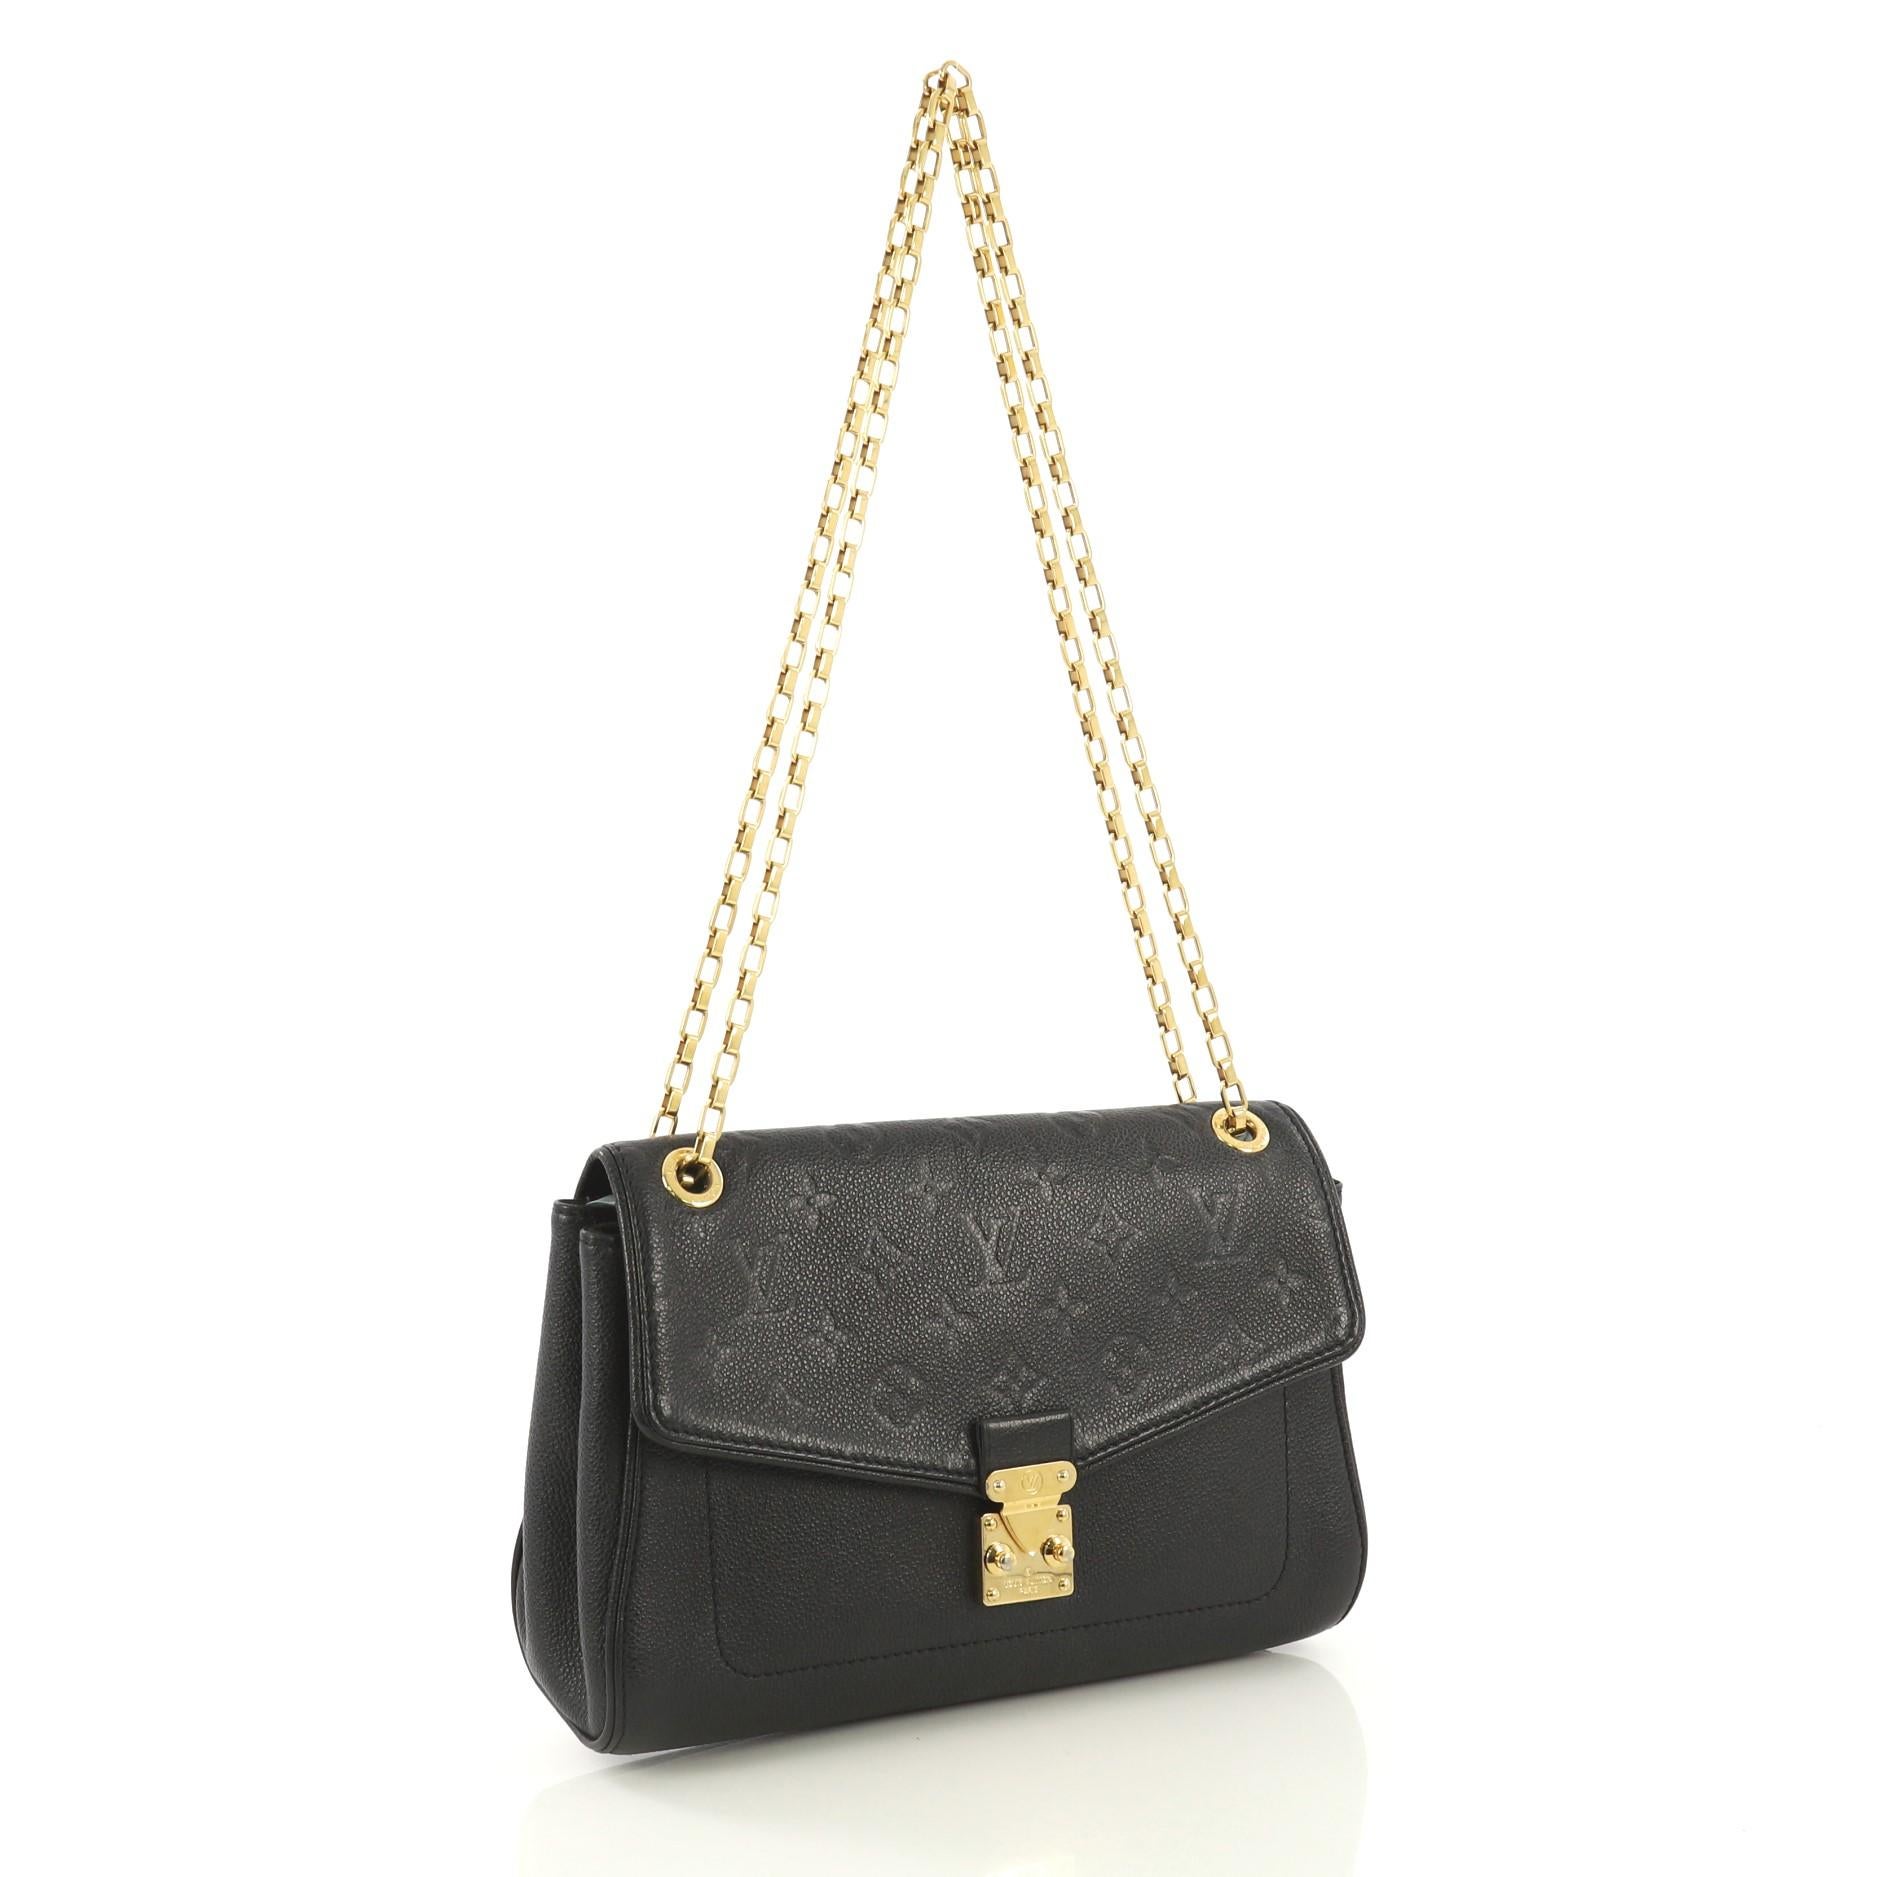 This Louis Vuitton Saint Germain Handbag Monogram Empreinte Leather PM, crafted from black monogram empreinte leather, features chain link shoulder strap and gold-tone hardware. Its S-lock closure opens to a black microfiber interior with zip